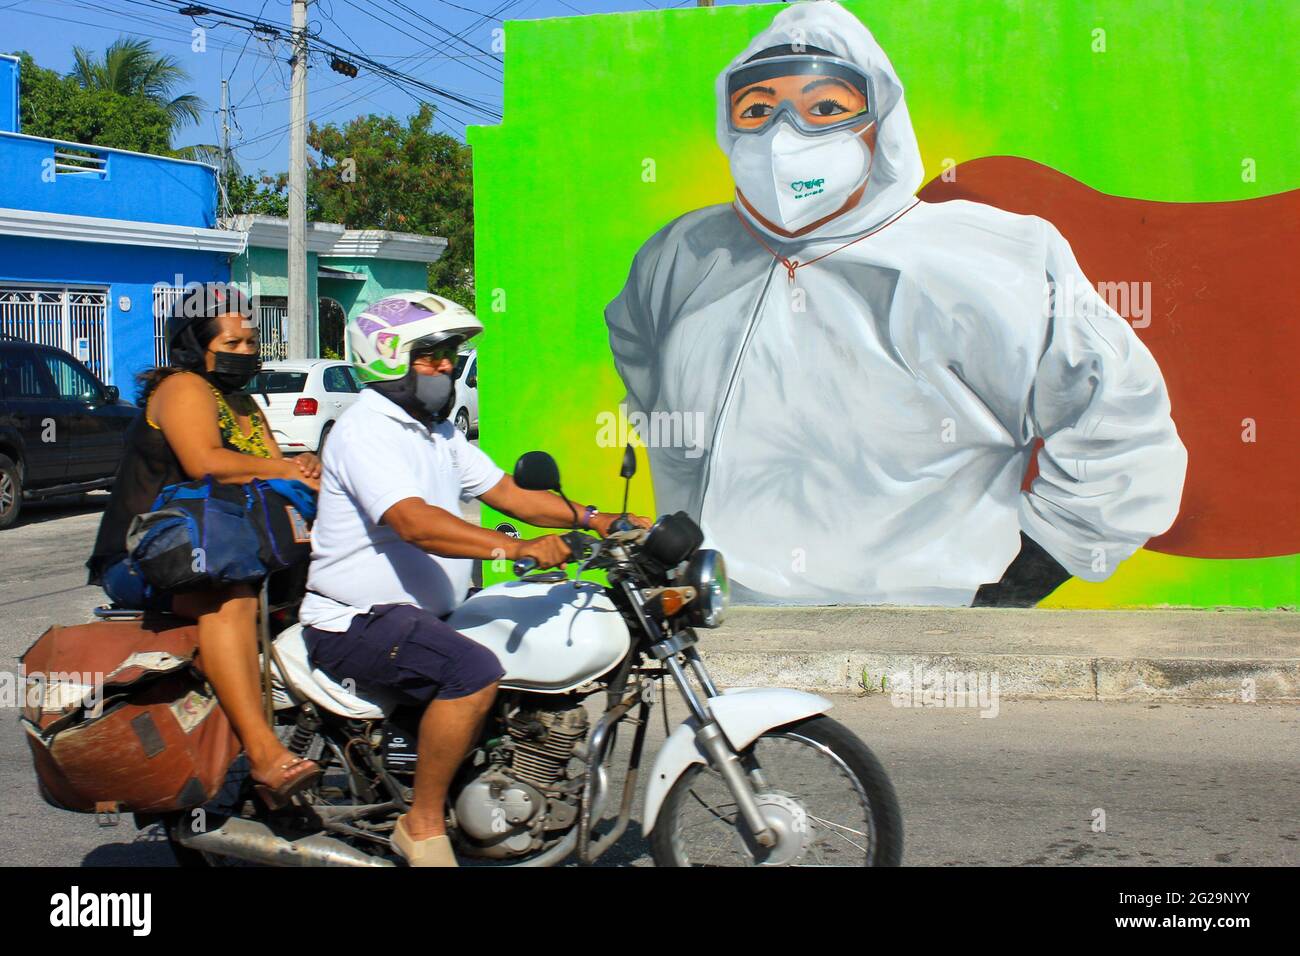 People on a motorcycle pass in front of mural celebrating healthcare workers as Covid-19 Heroes, Merida Mexico Stock Photo